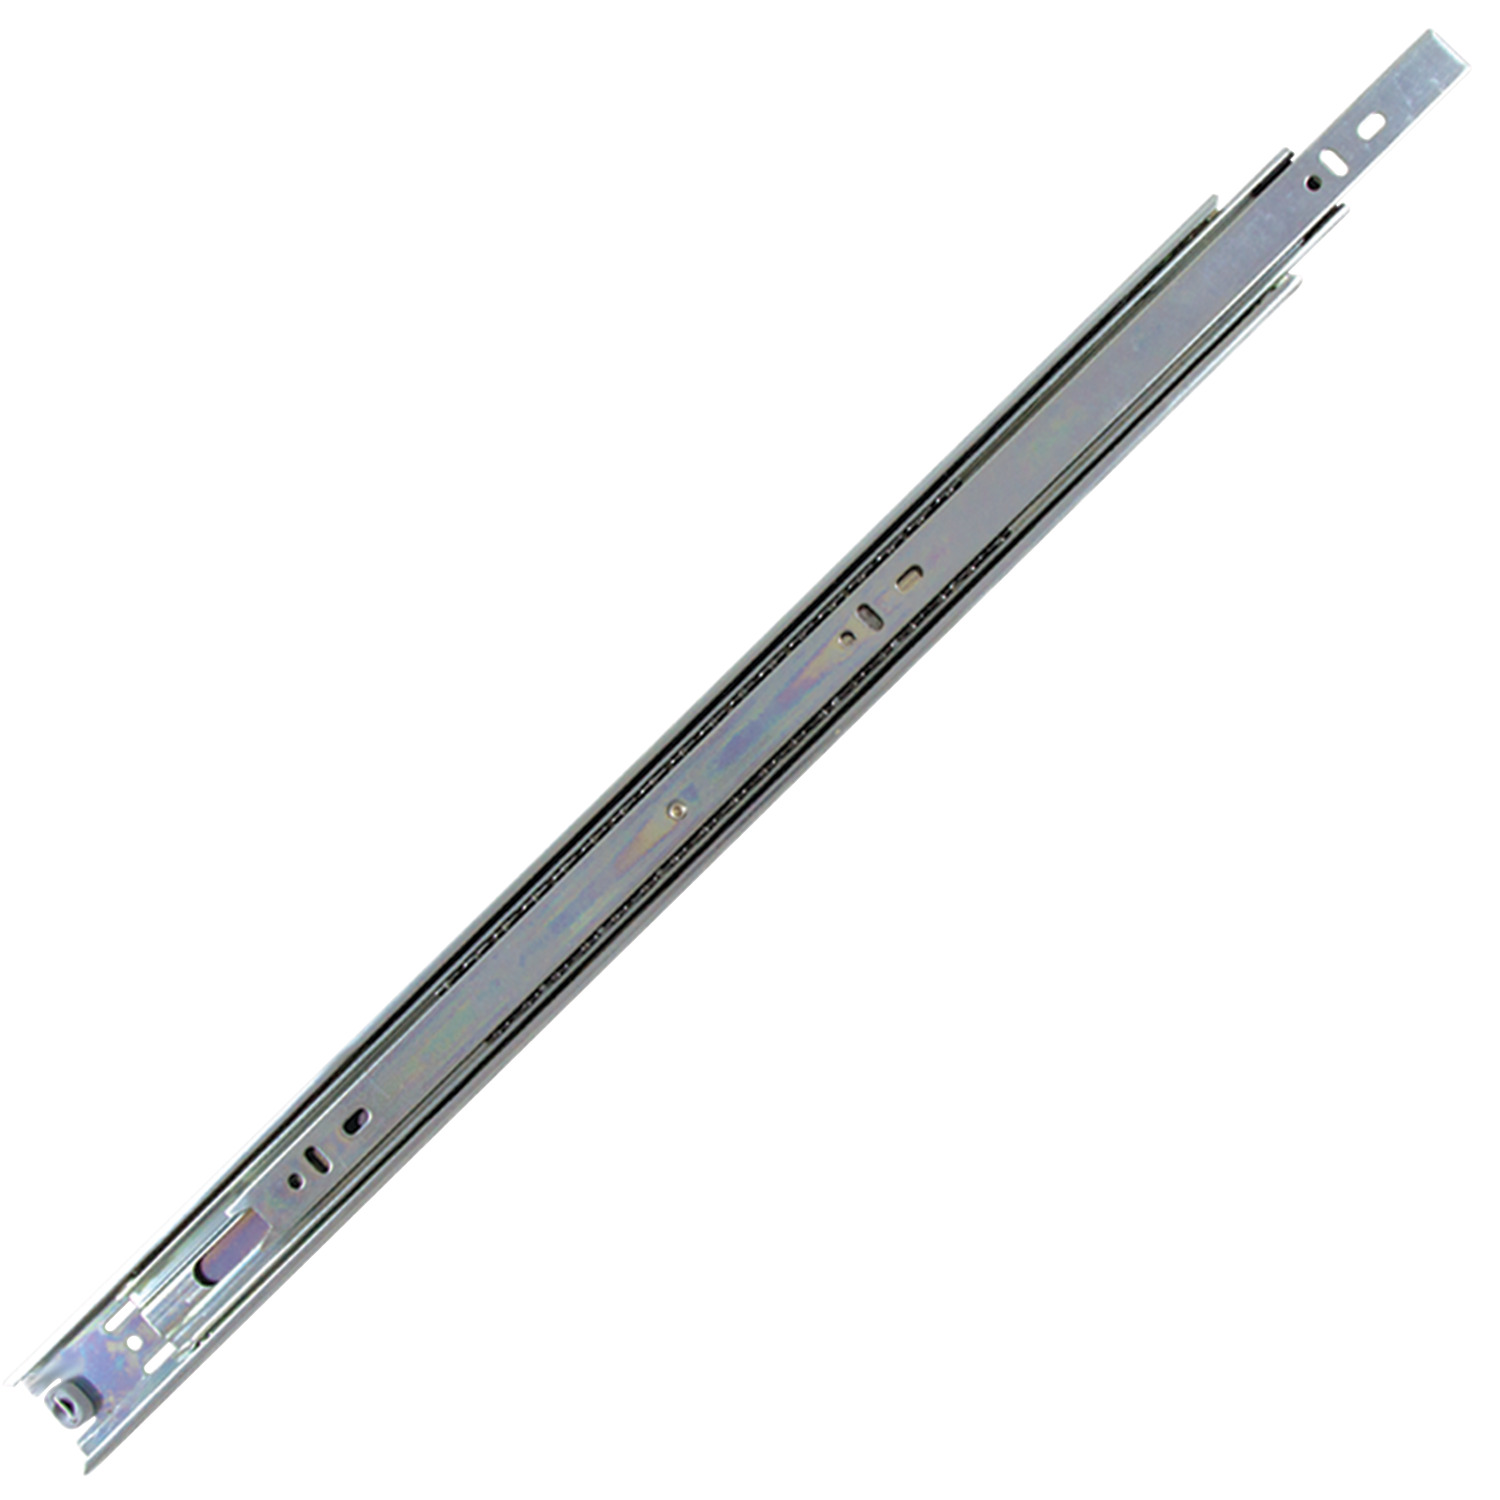 Drawer Slide - Full Extension Hold-in detent when slide closed. Positive stop. Rails can be disconnected via pressing disconnect lever.